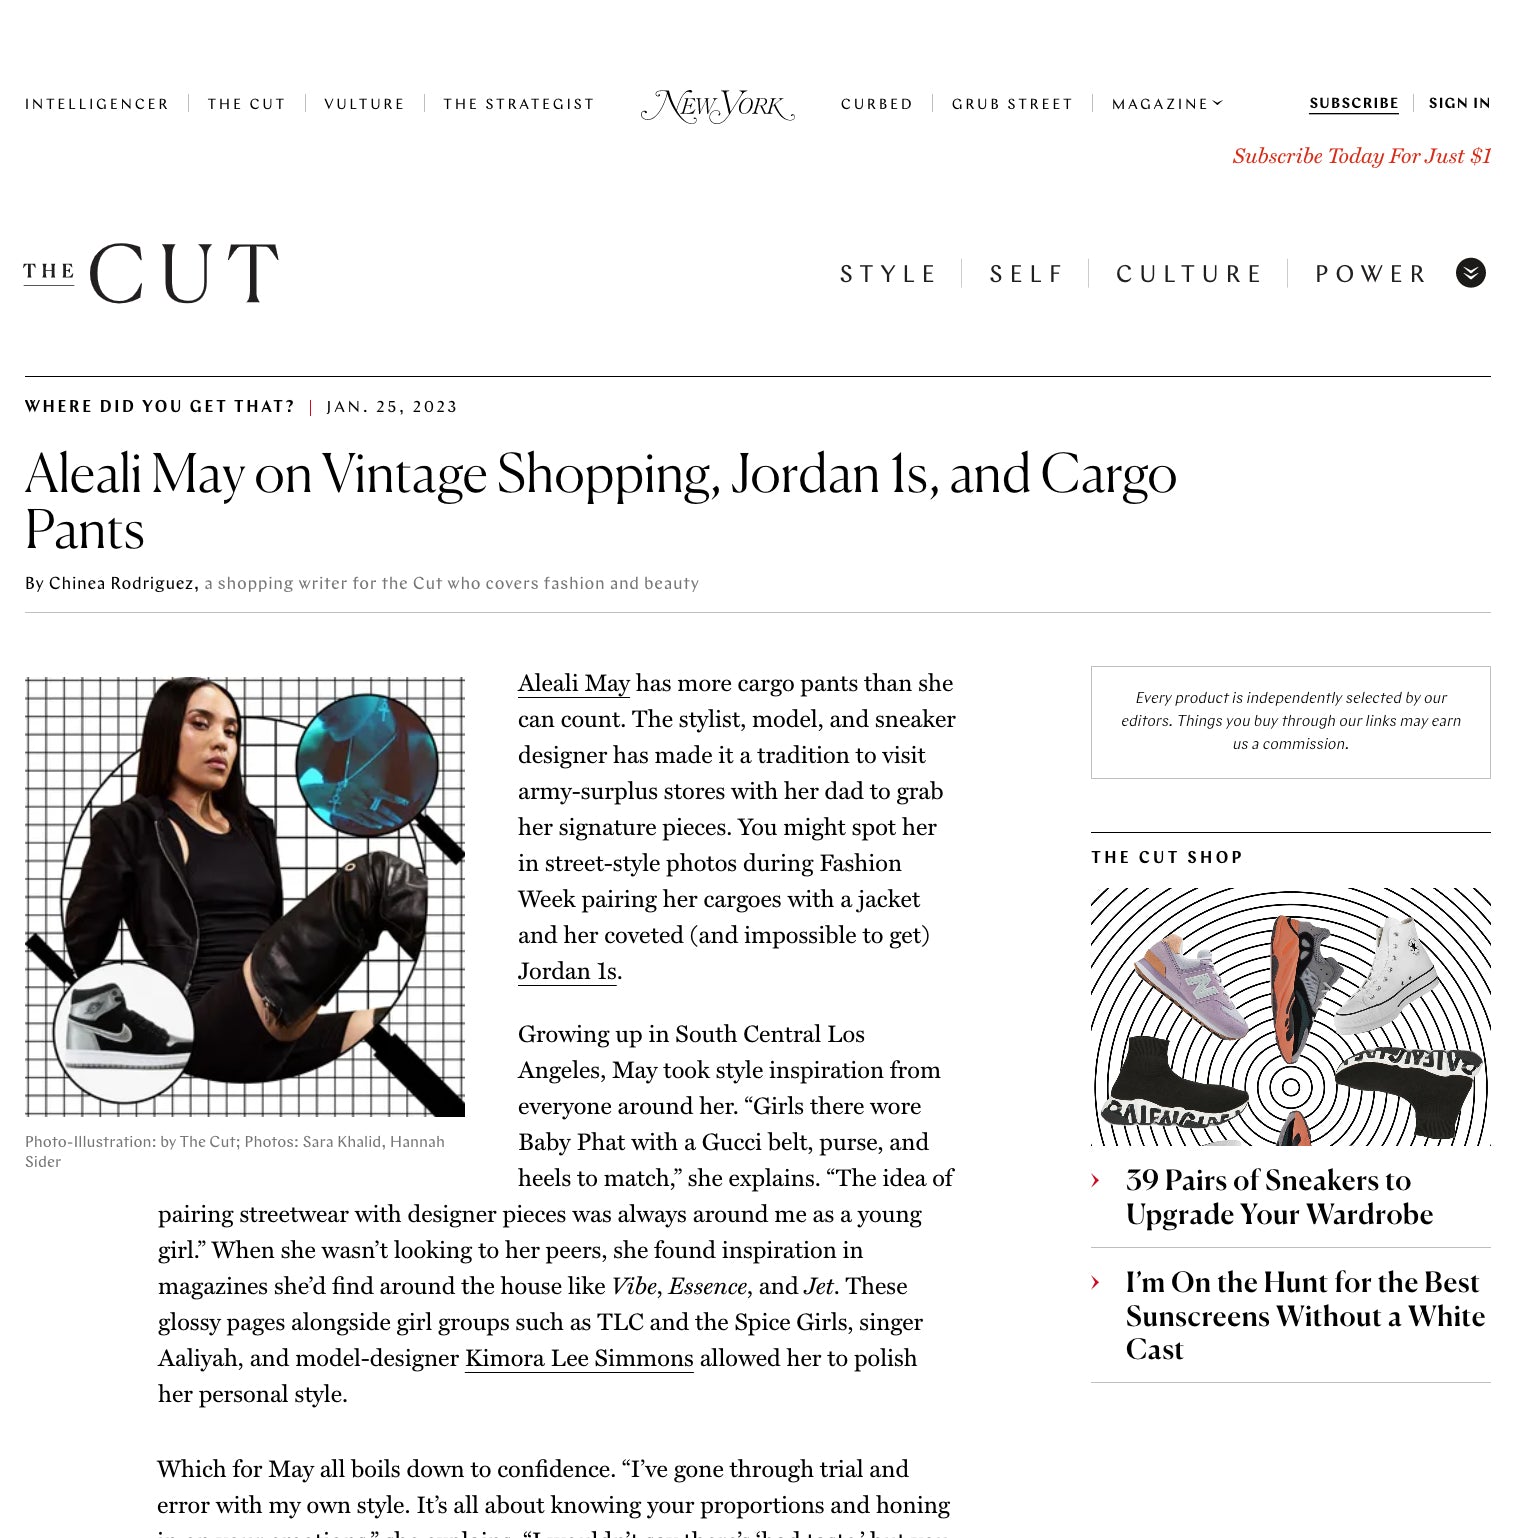 The Cut: Aleali May on Vintage Shopping, Jordan 1s, and Cargo Pants